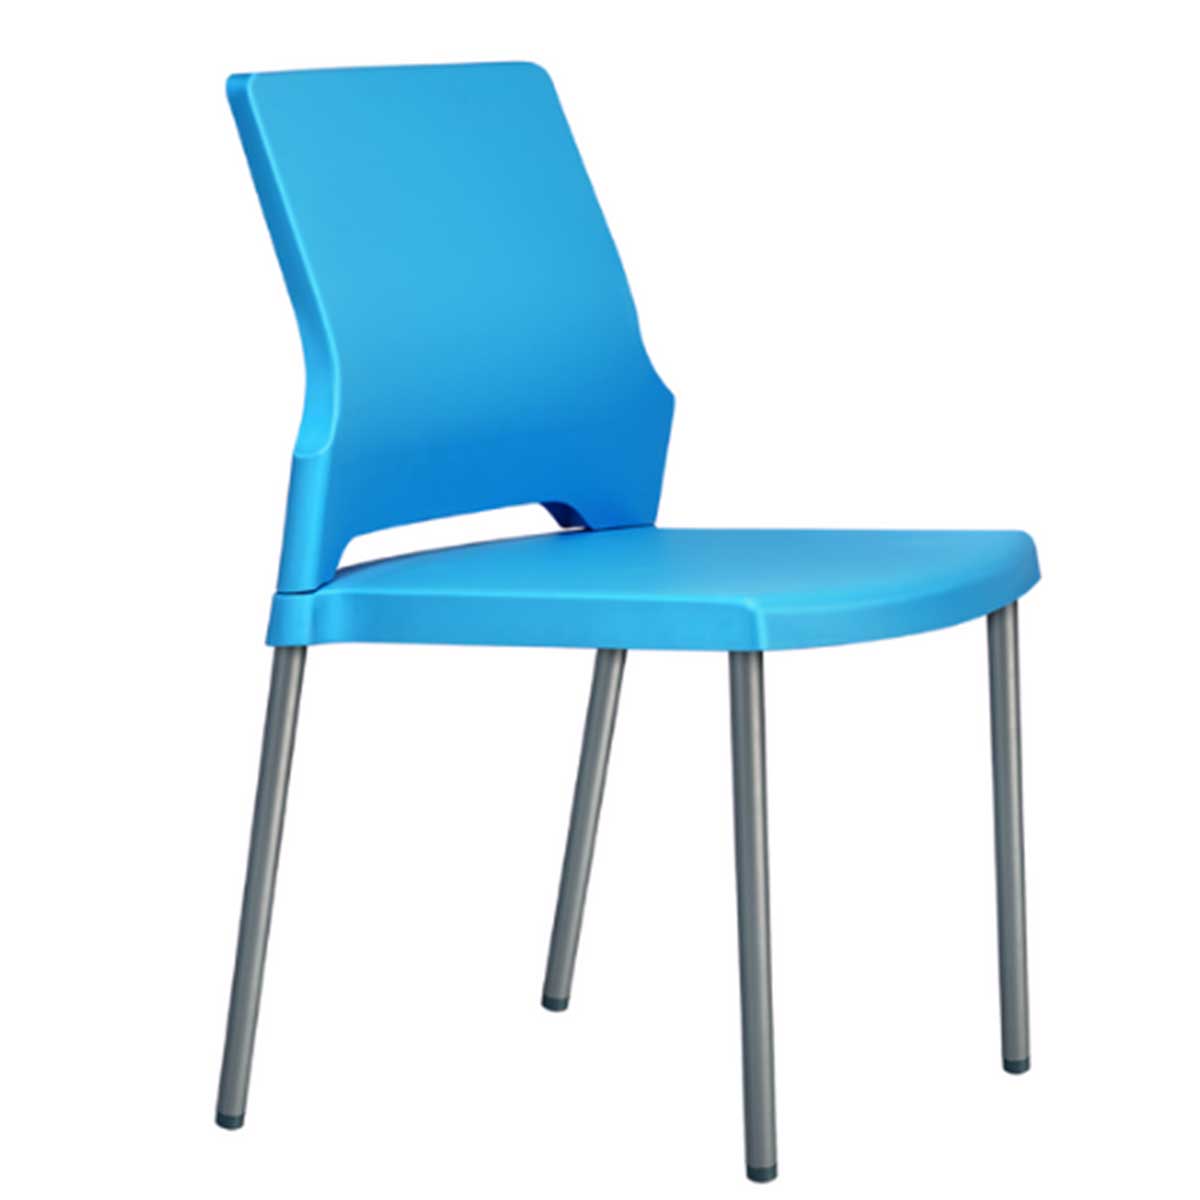 Cafeteria Chair Manufacturers, Suppliers in Noida Sector 56